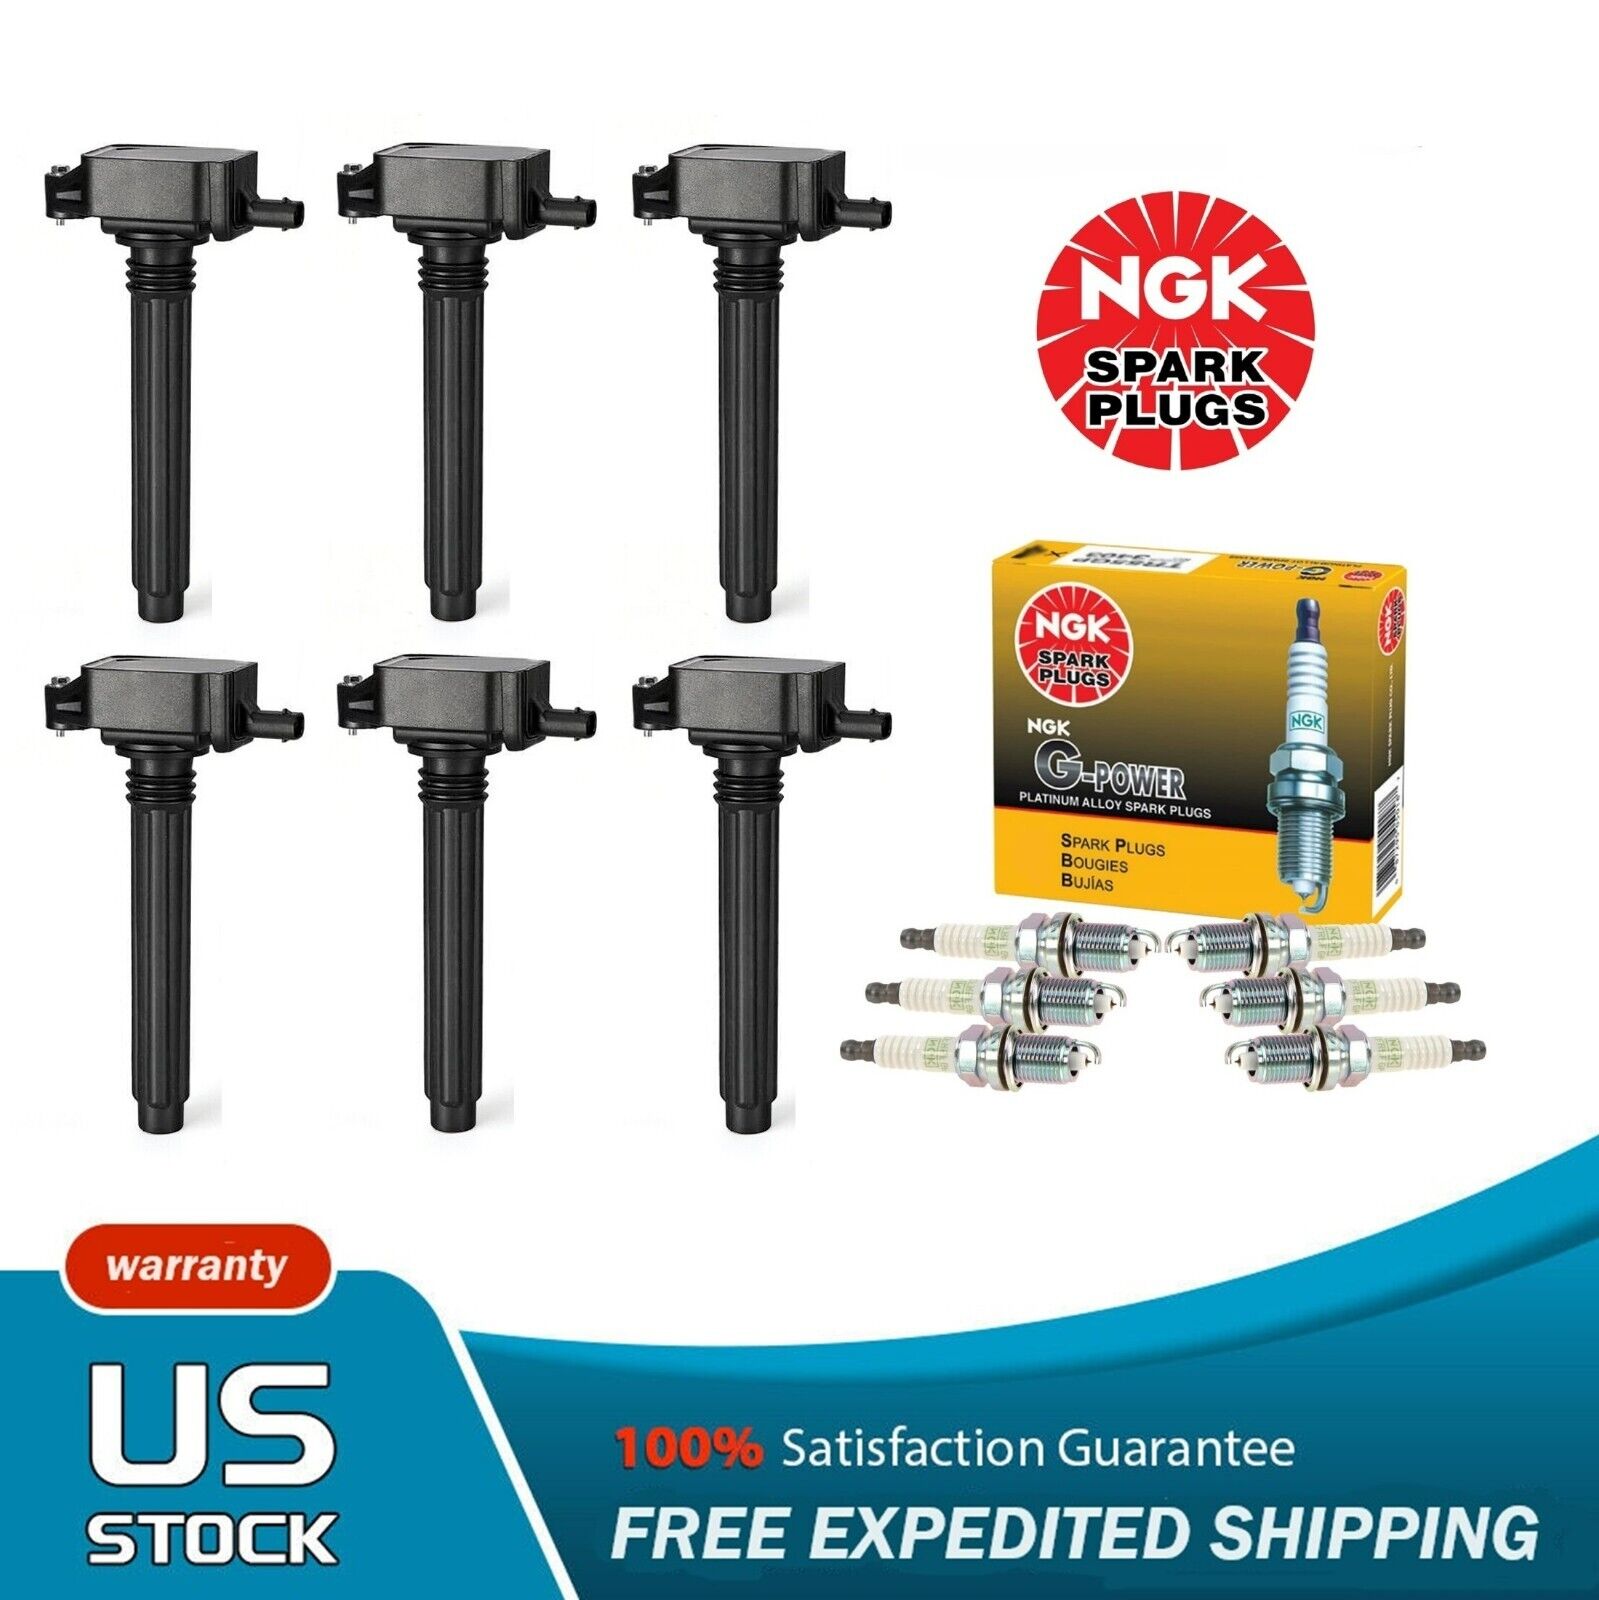 6PCS Ignition Coils and 6PCS NGK Spark Plugs for Chrysler Jeep Dodge Ram 3.6L